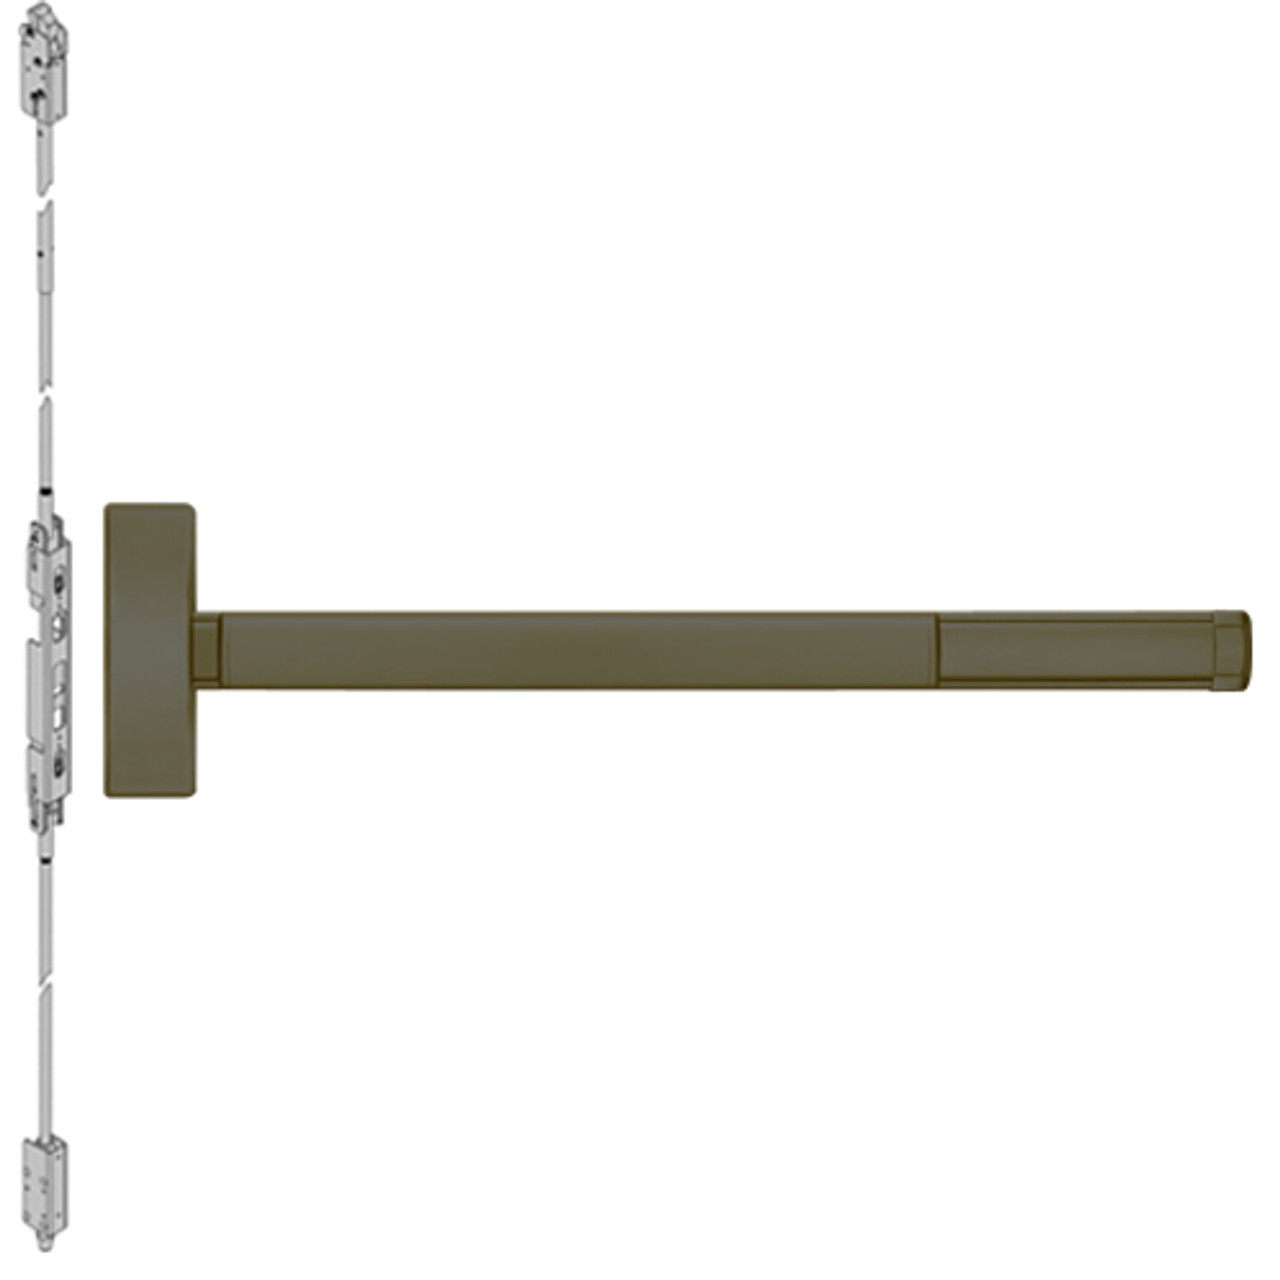 TSFL2803LBR-613-48 PHI 2800 Series Fire Rated Concealed Vertical Rod Exit Device with Touchbar Monitoring Switch Prepped for Key Retracts Latchbolt in Oil Rubbed Bronze Finish